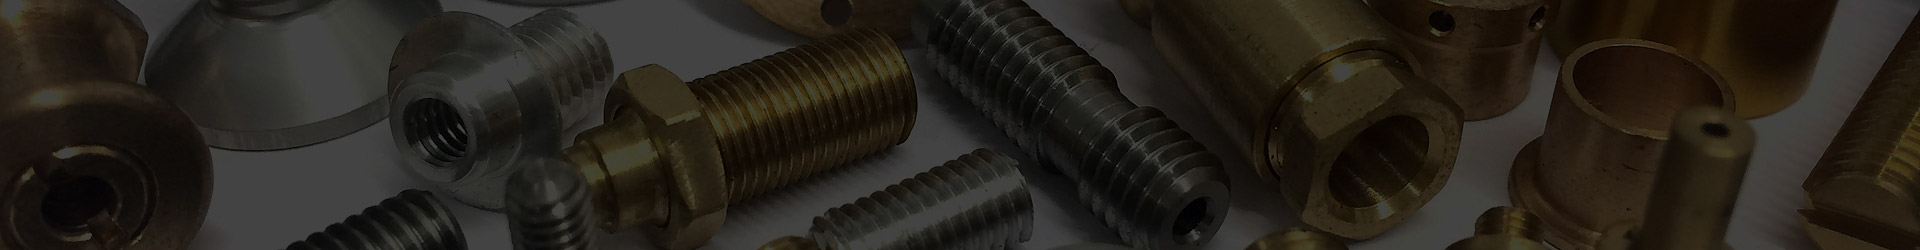 Brass Parts For Welding Application